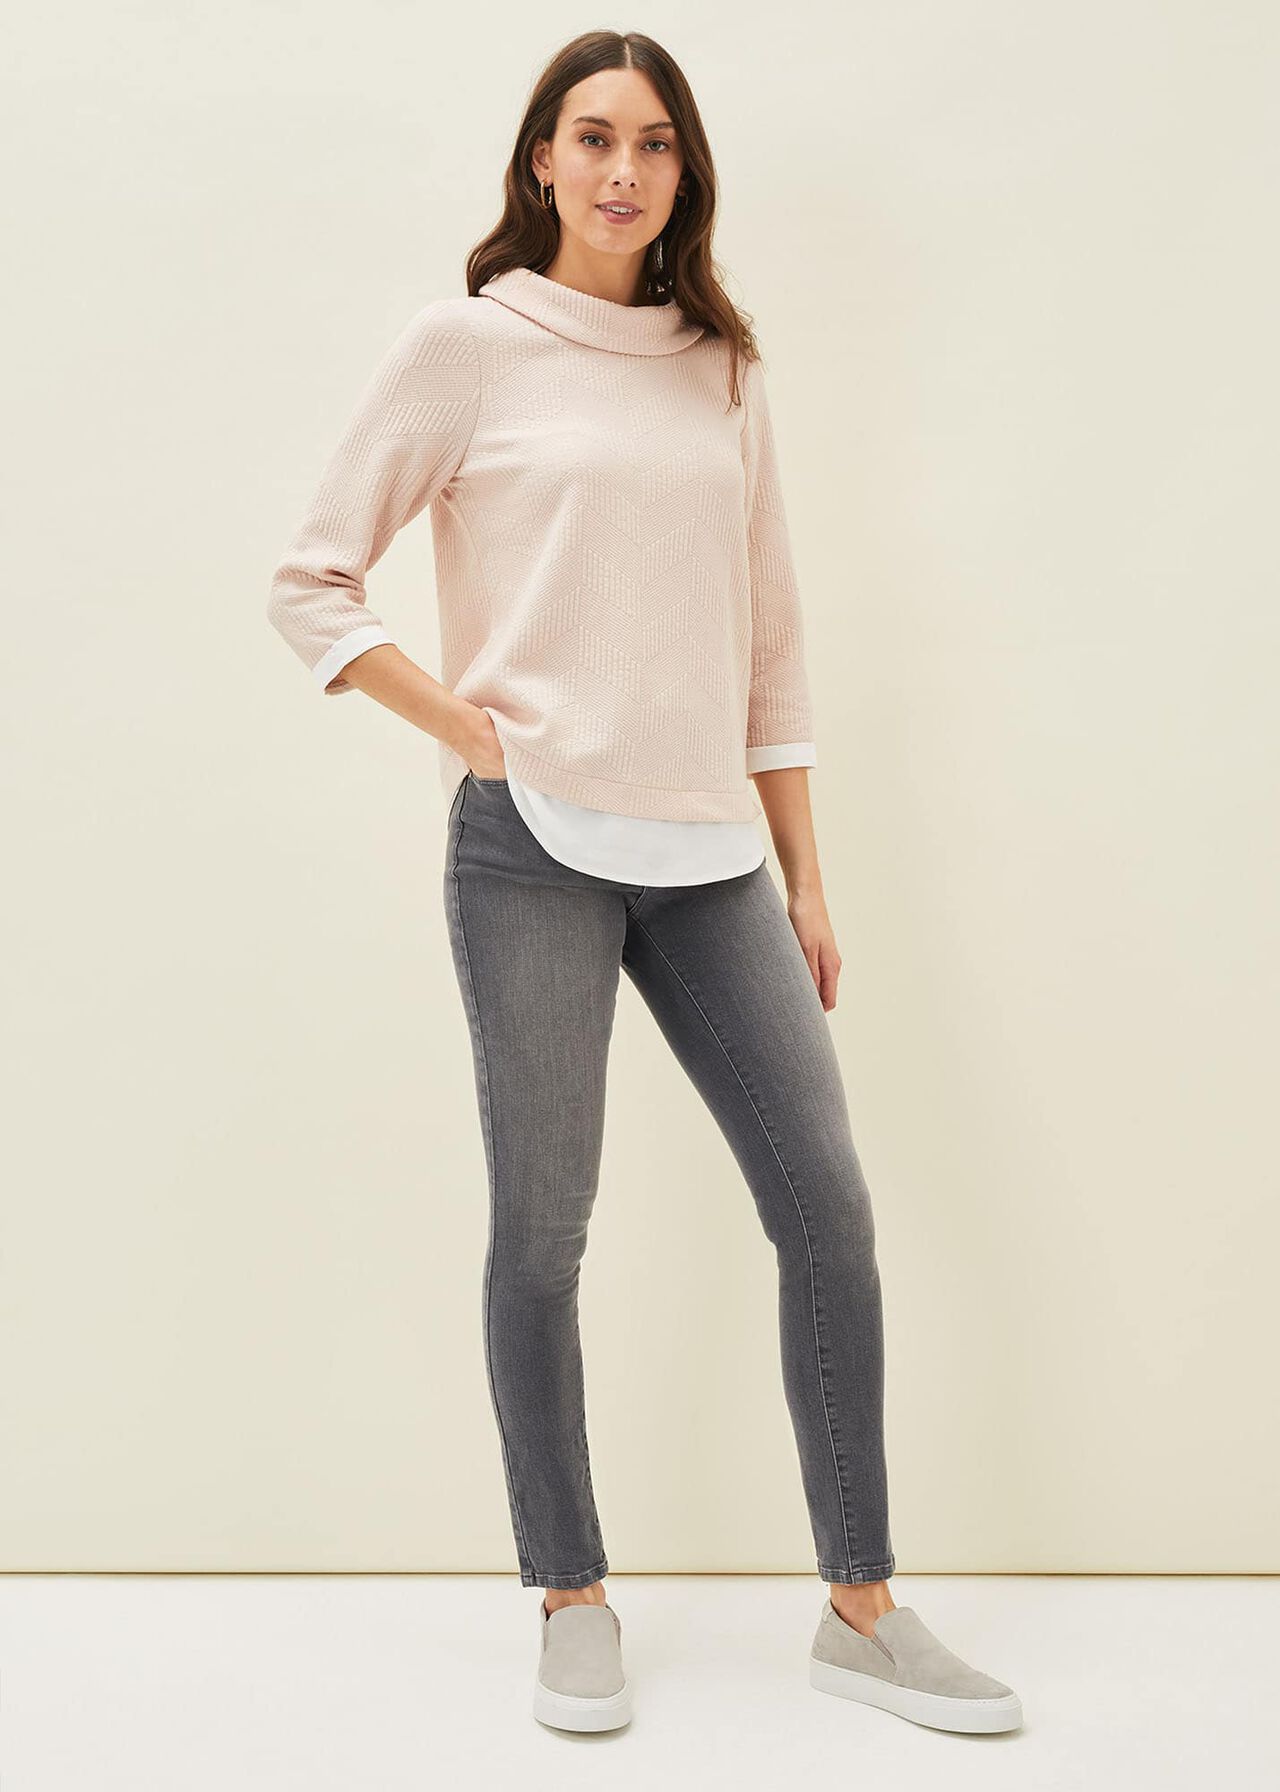 Mica Textured Double Layer Top